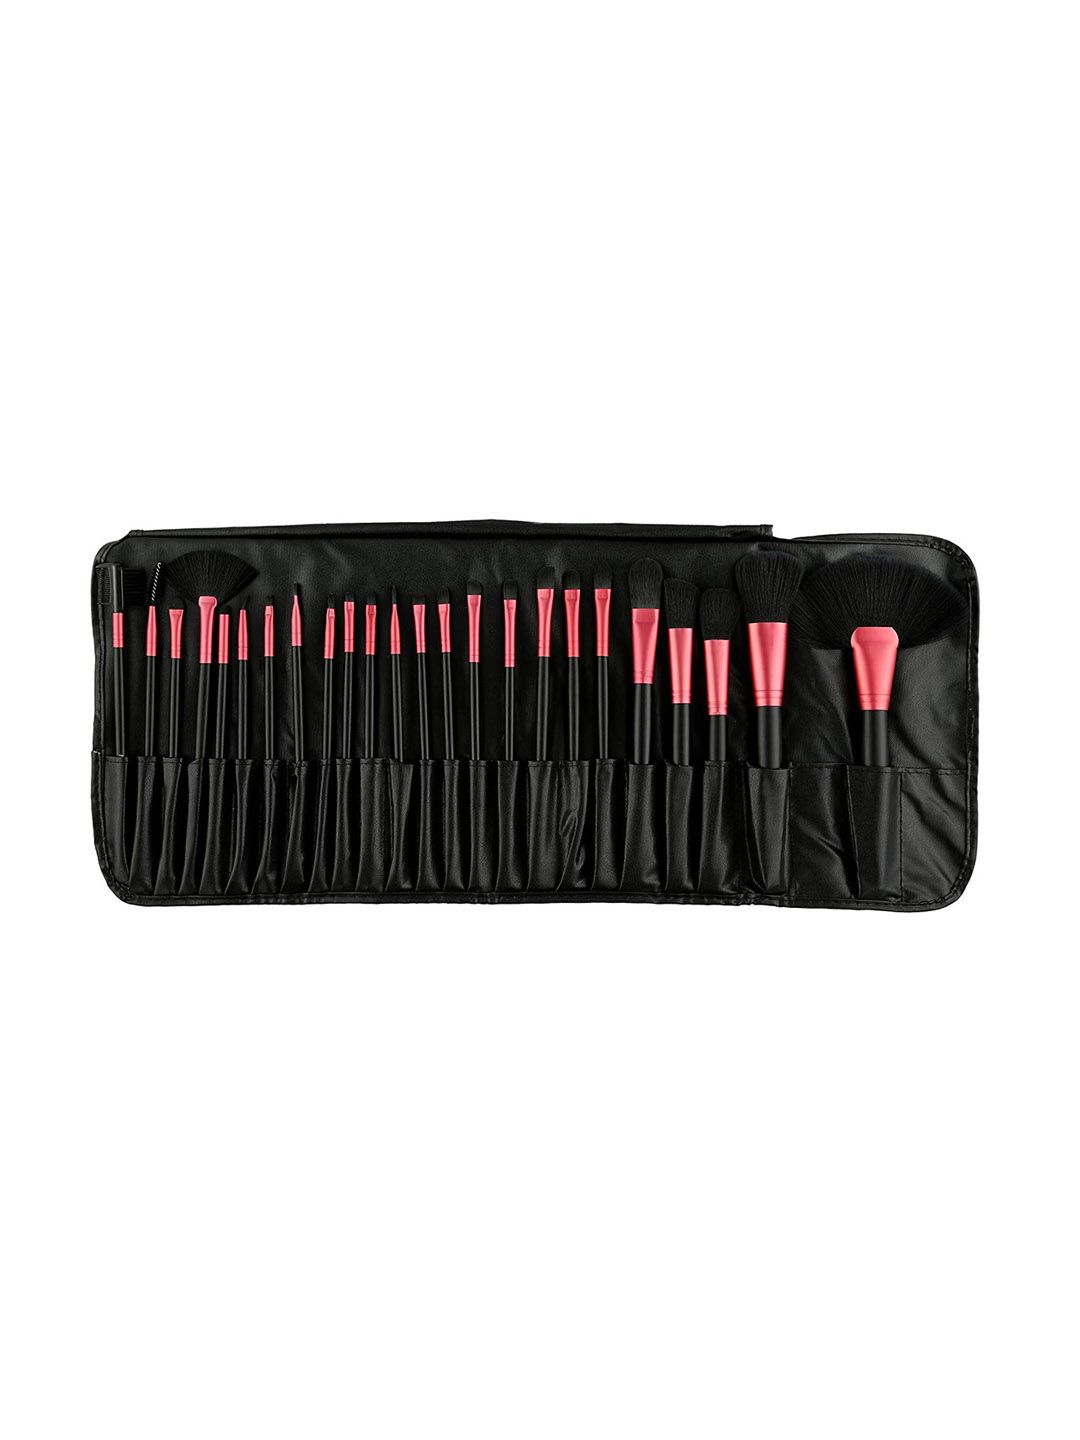 Foolzy Set of 24 Makeup Brushes With Storage Pouch Price in India